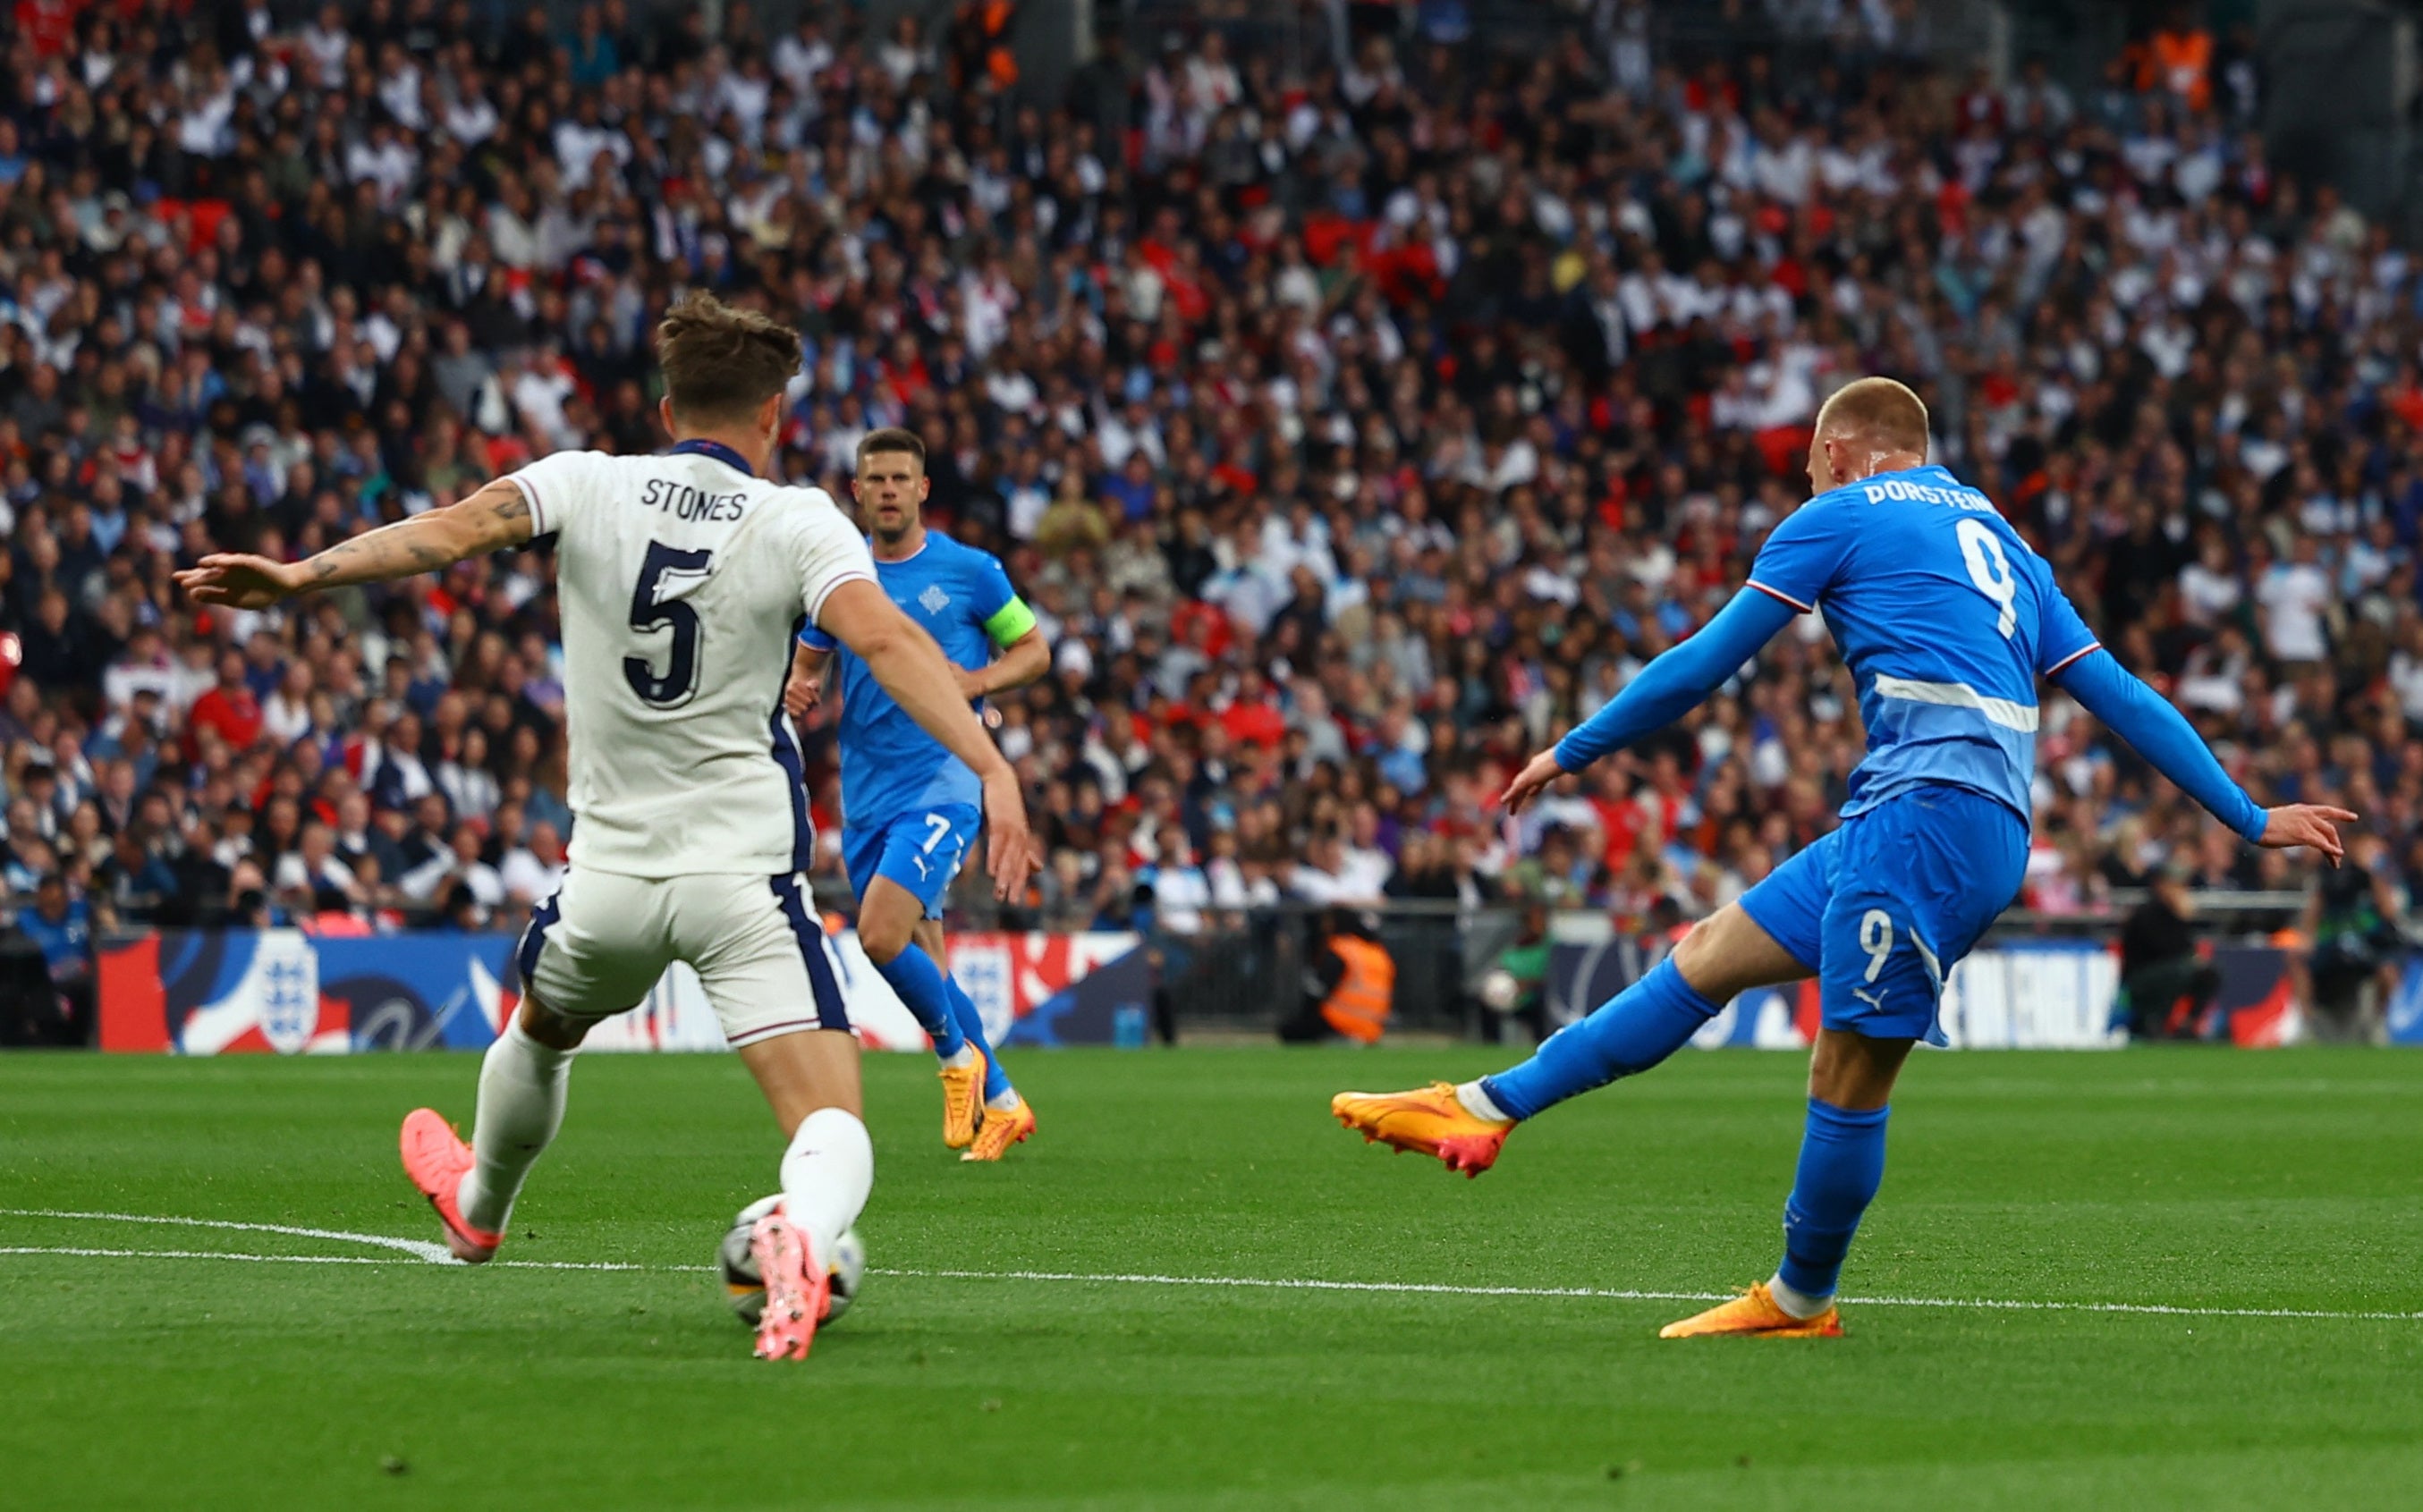 Jon Thorsteinsson netted Iceland’s goal in the 12th minute to put England on the back foot at Wembley.